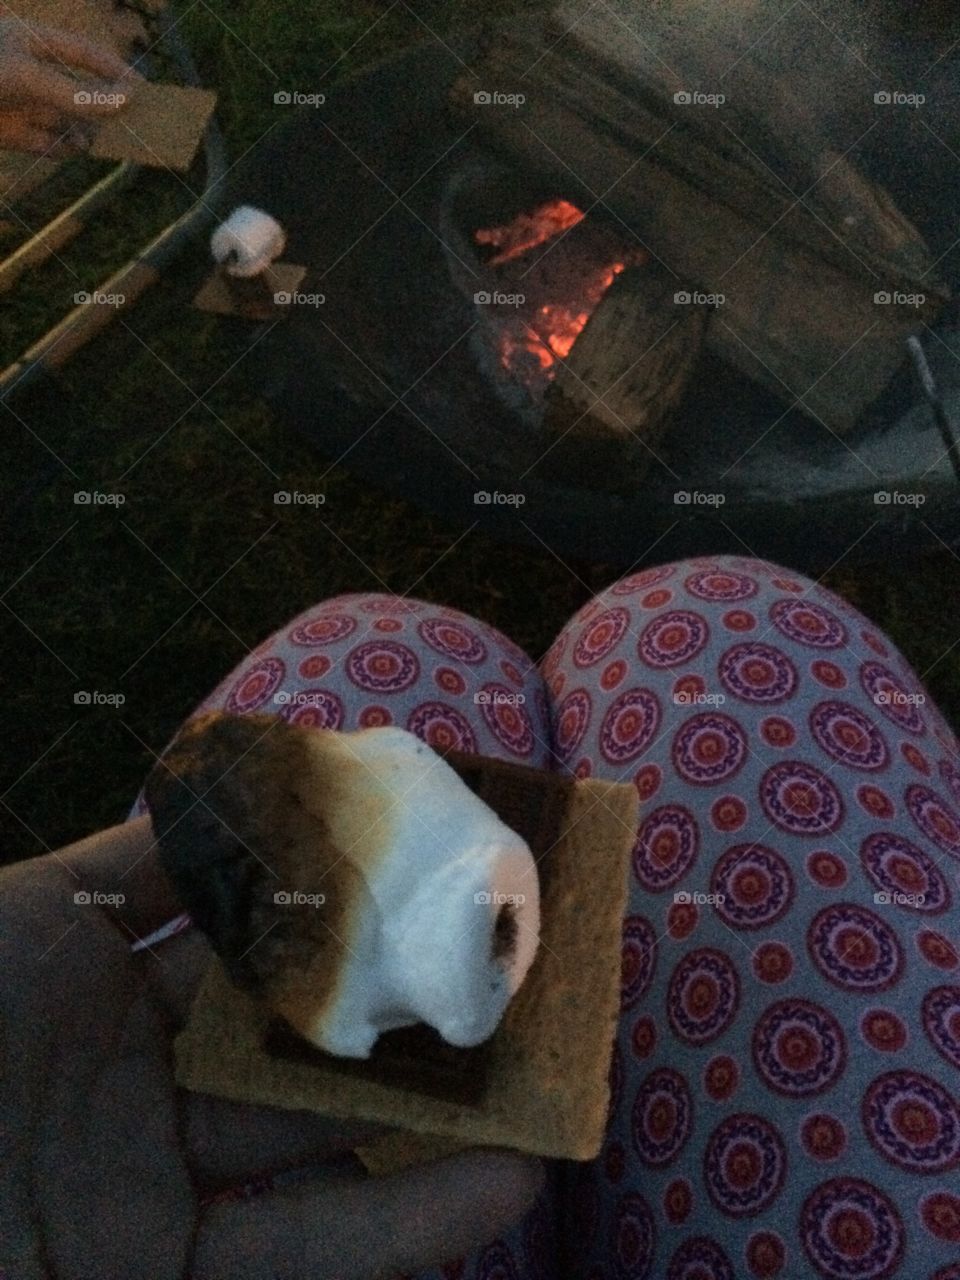 S'mores . Almost ready to eat my s'mores! 